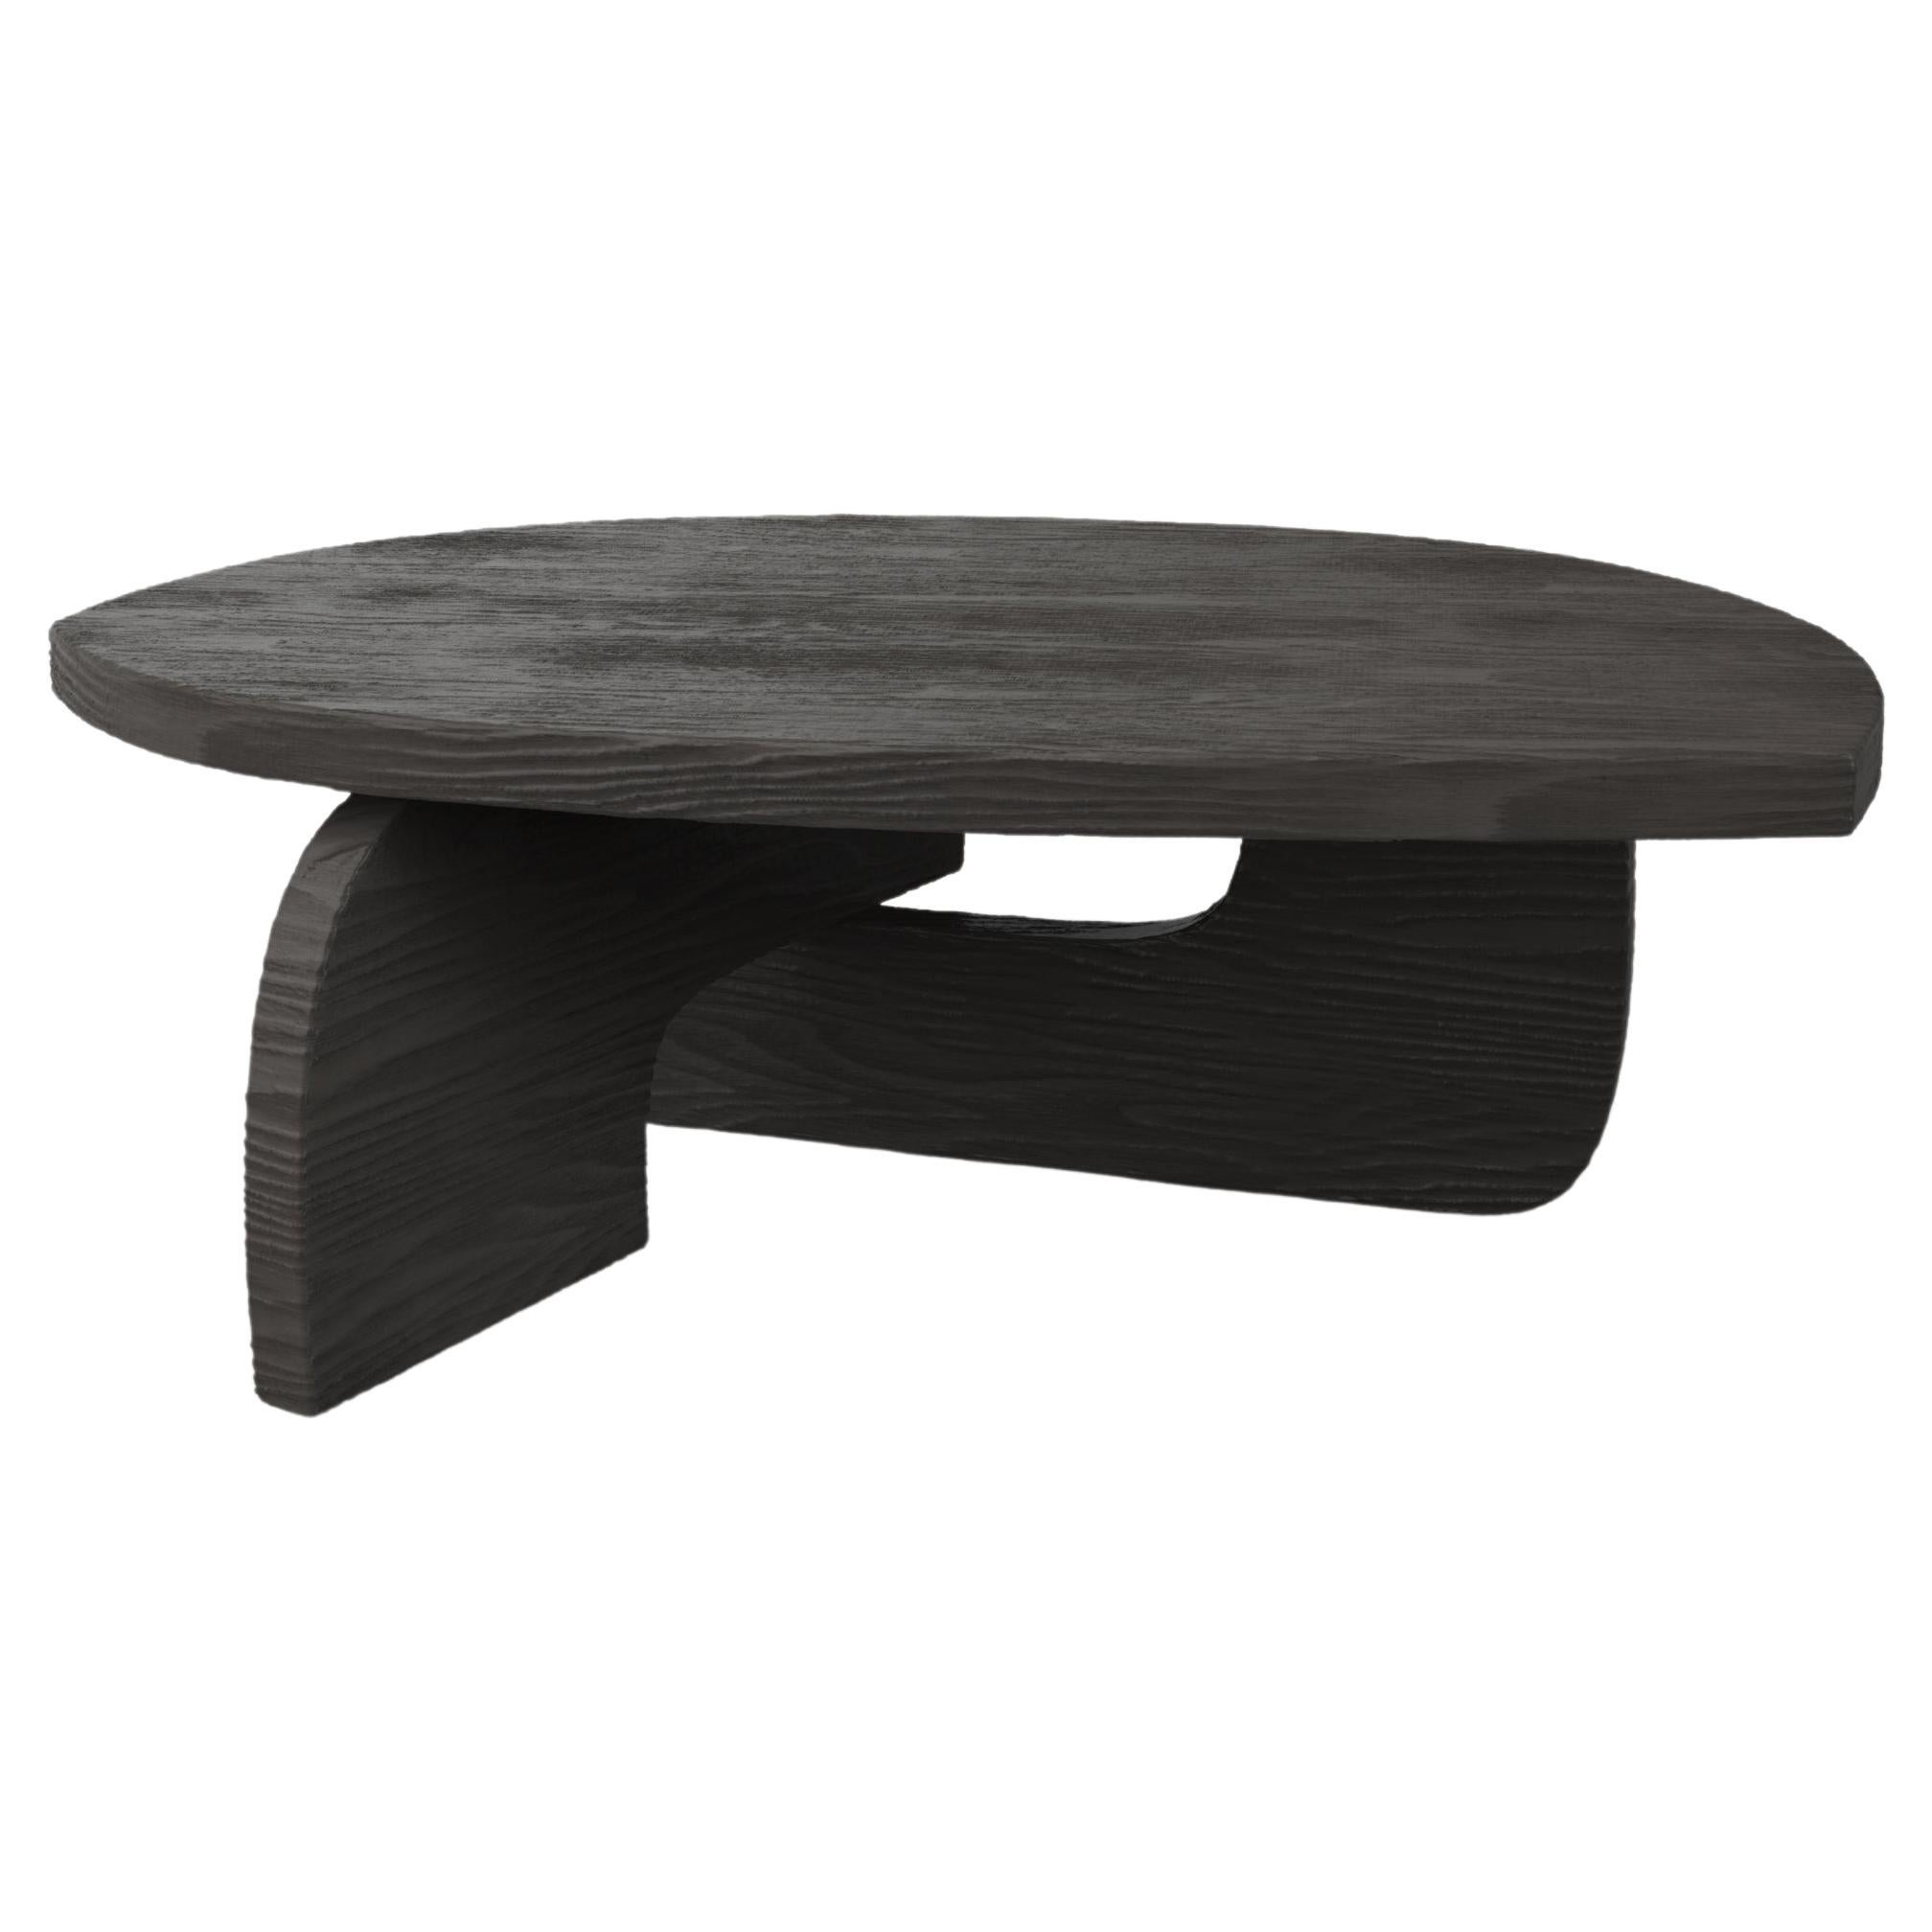 Contemporary Limited Edition Charred Low Table, Reef V3 by Edizione Limitata For Sale